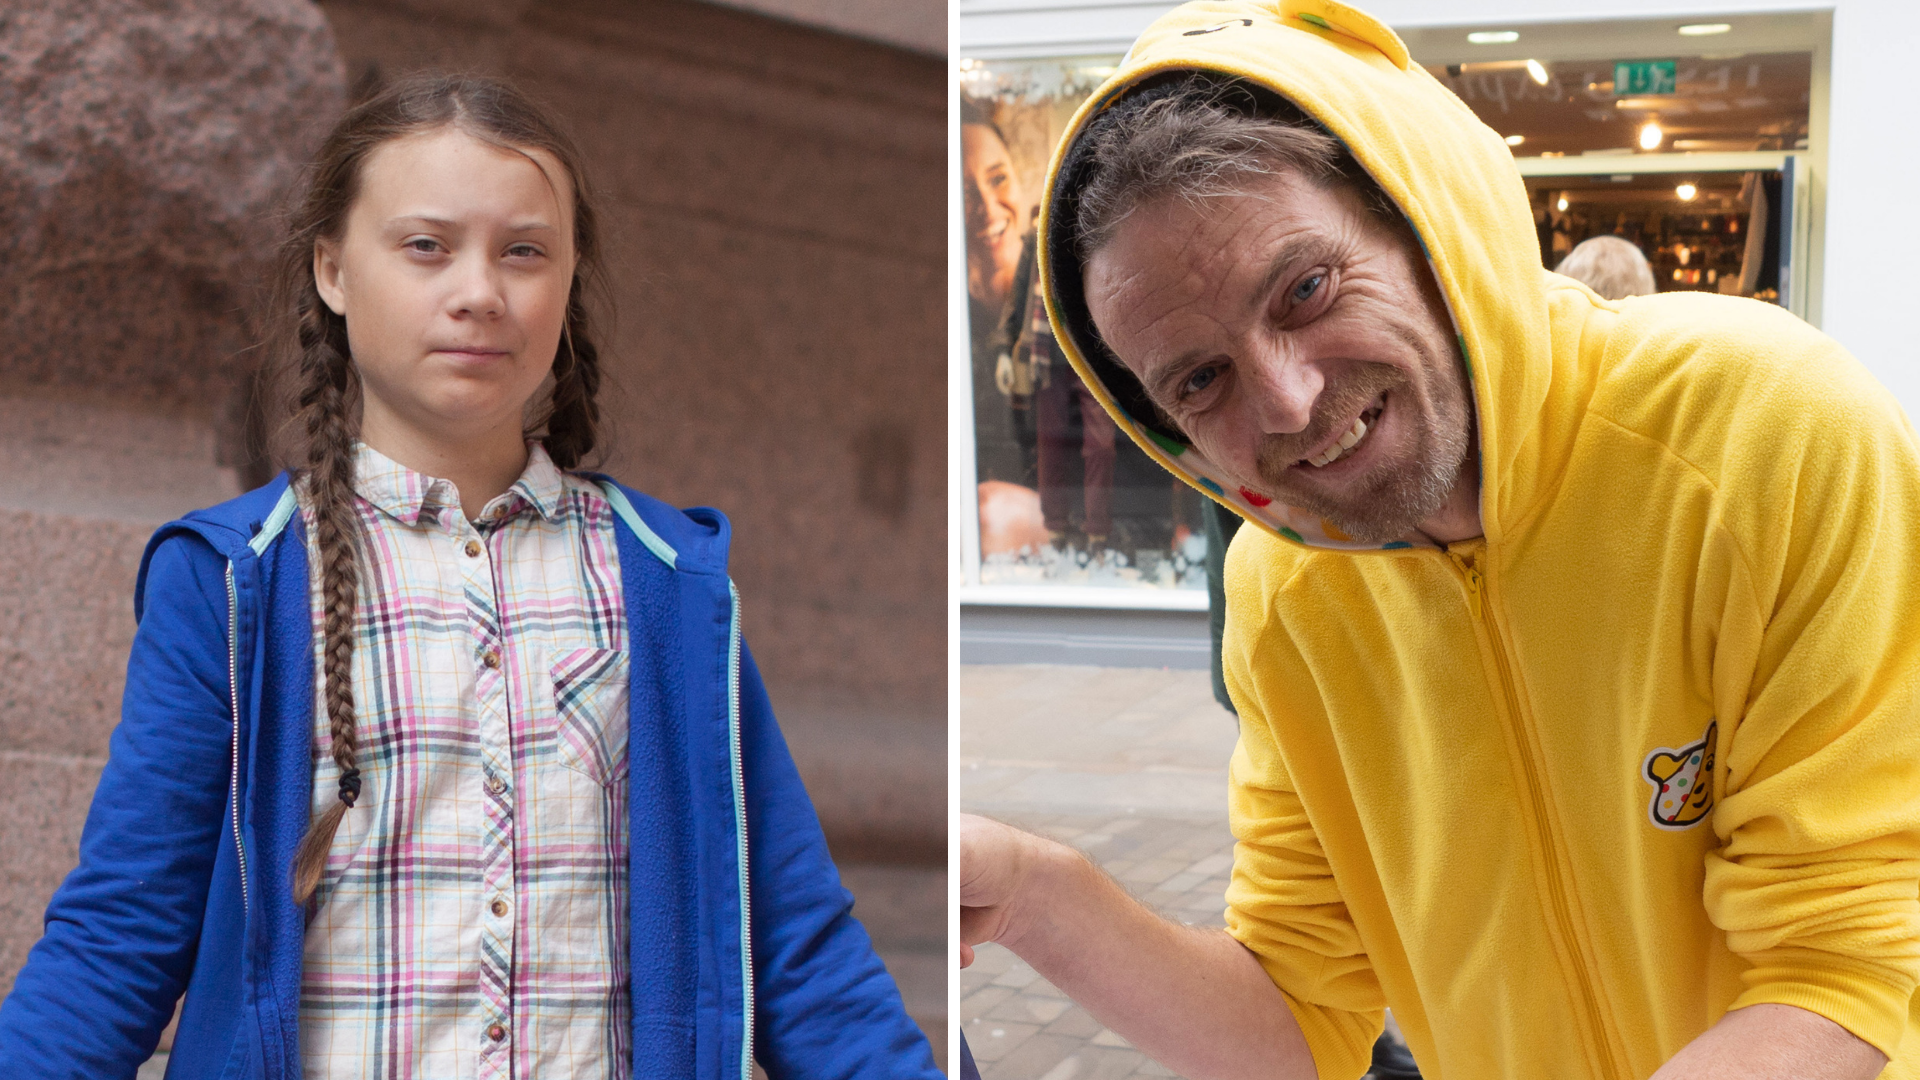 Greta Thunberg could find herself sharing a plinth with a Big Issue vendor Kev. Image credit: Anders Hellberg / Wikimedia Commons